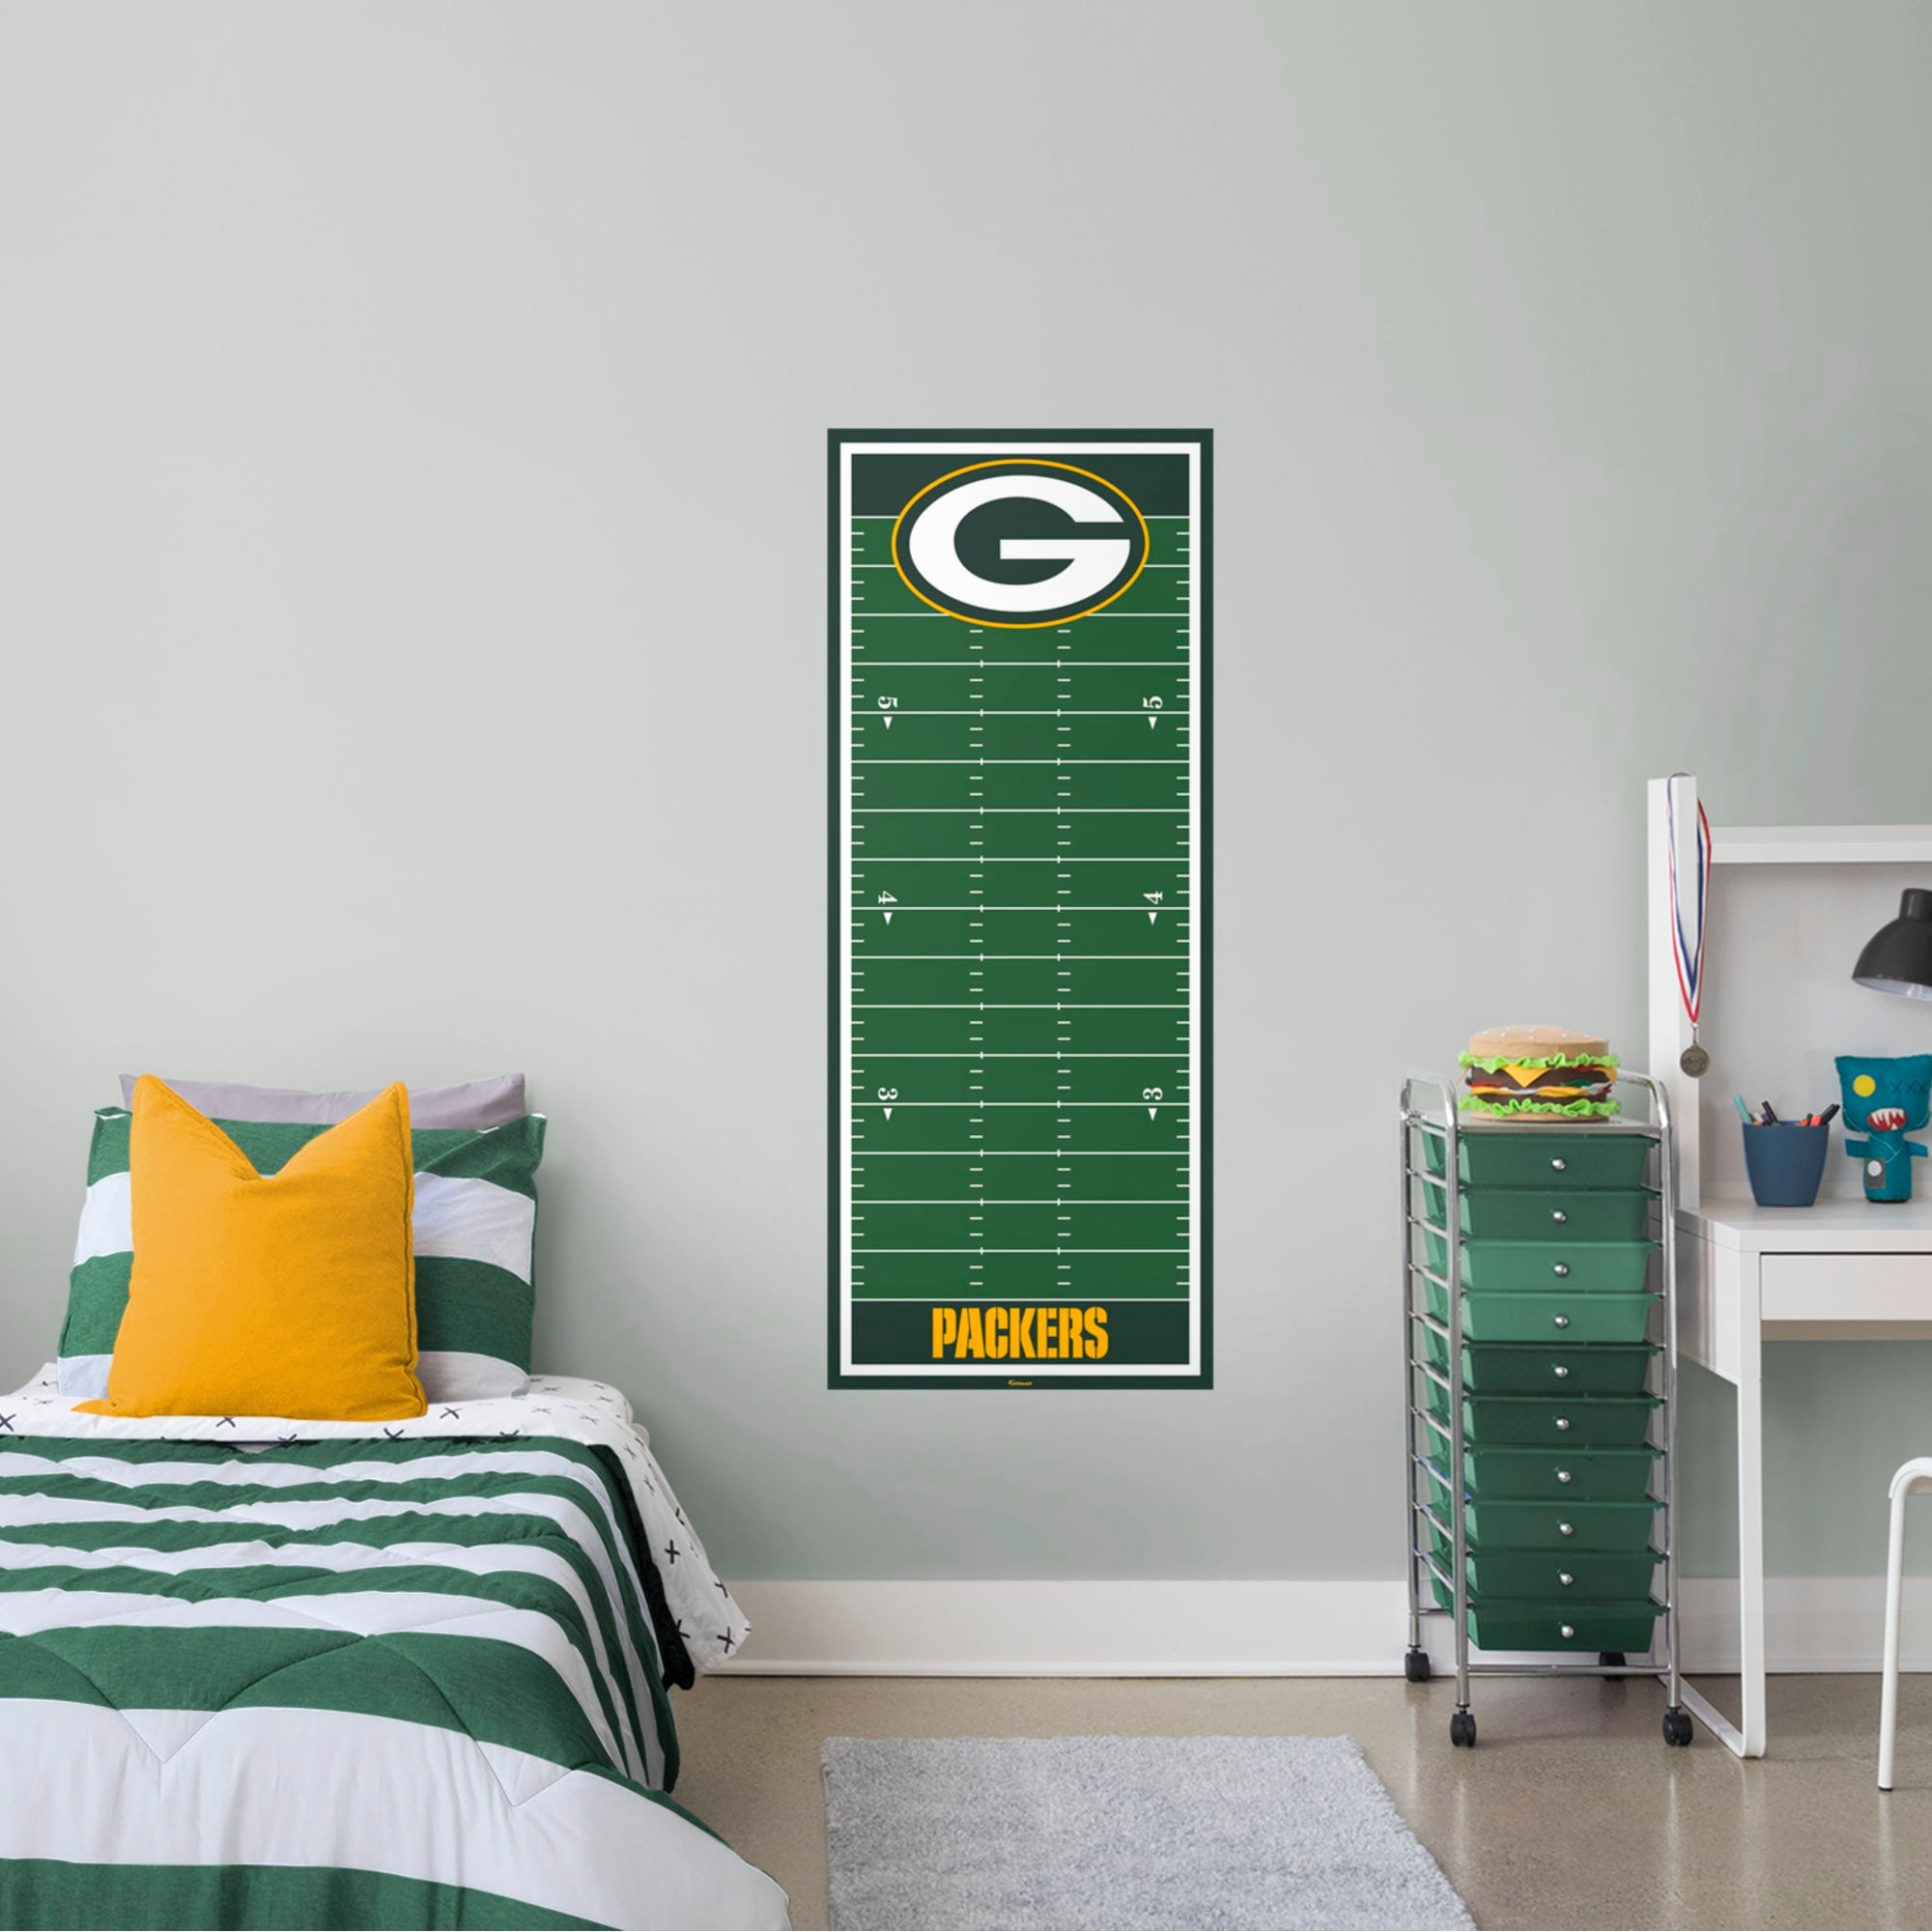 Green Bay Packers: Growth Chart - Officially Licensed NFL Removable Wall Graphic 24.0"W x 59.0"H by Fathead | Vinyl